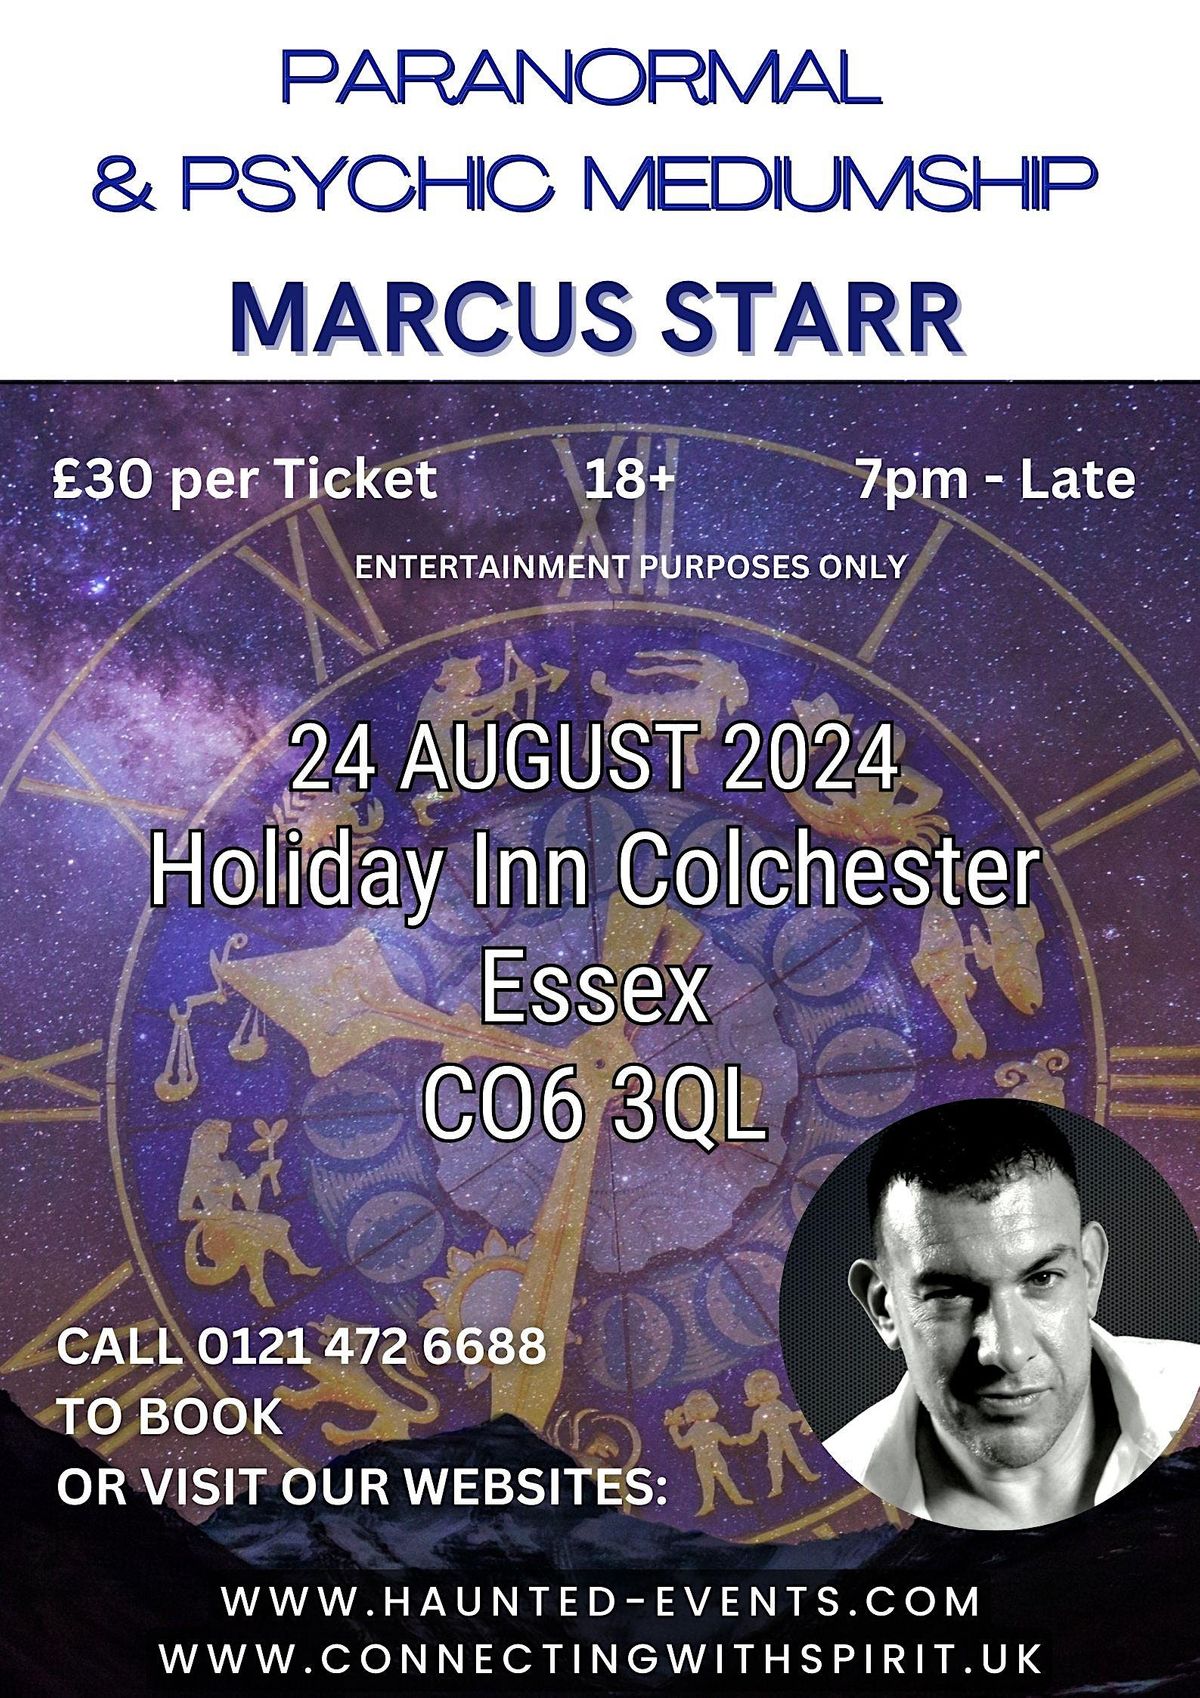 Paranormal & Mediumship with Celebrity Psychic Marcus Starr @ Colchester